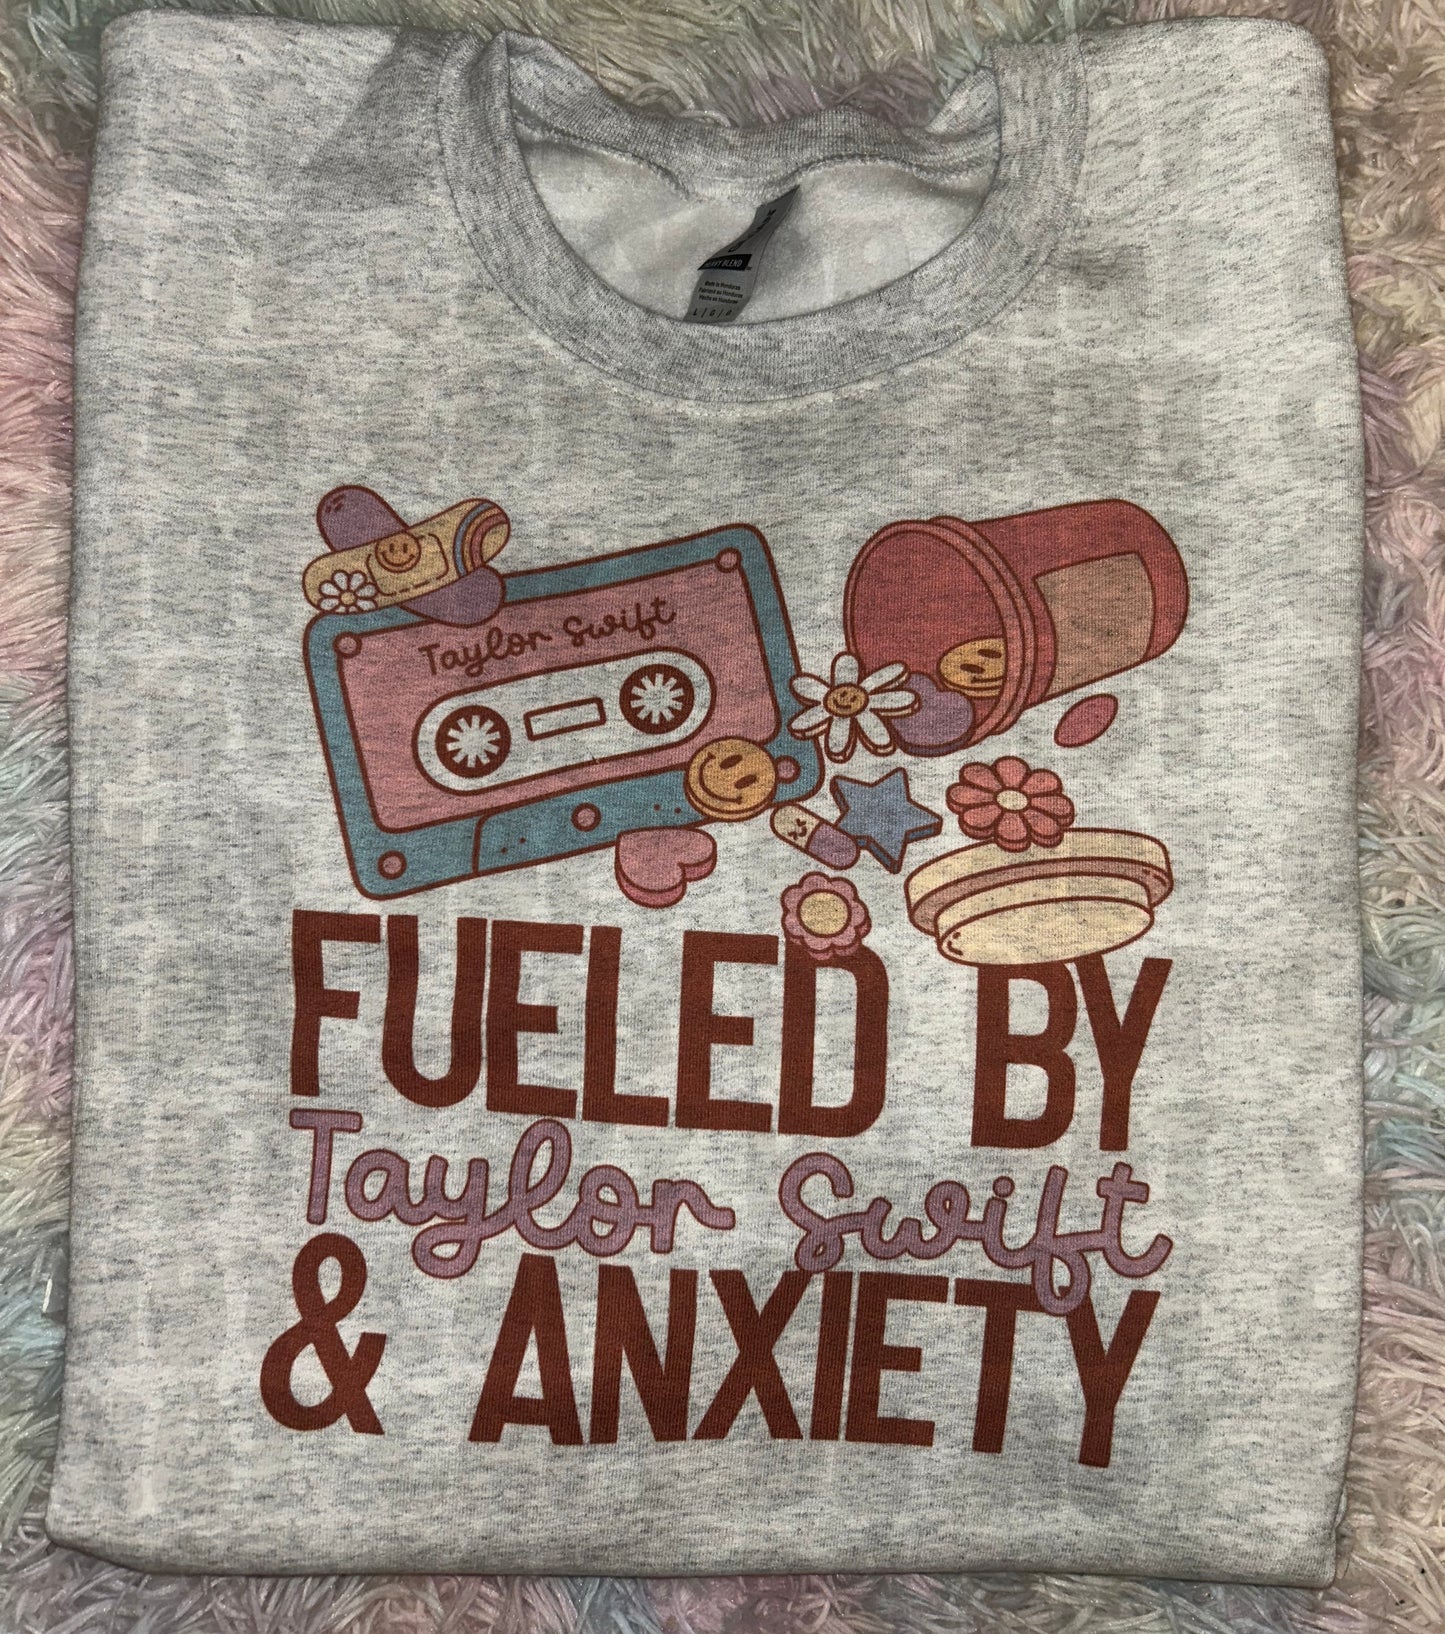 TS & Anxiety PREORDER